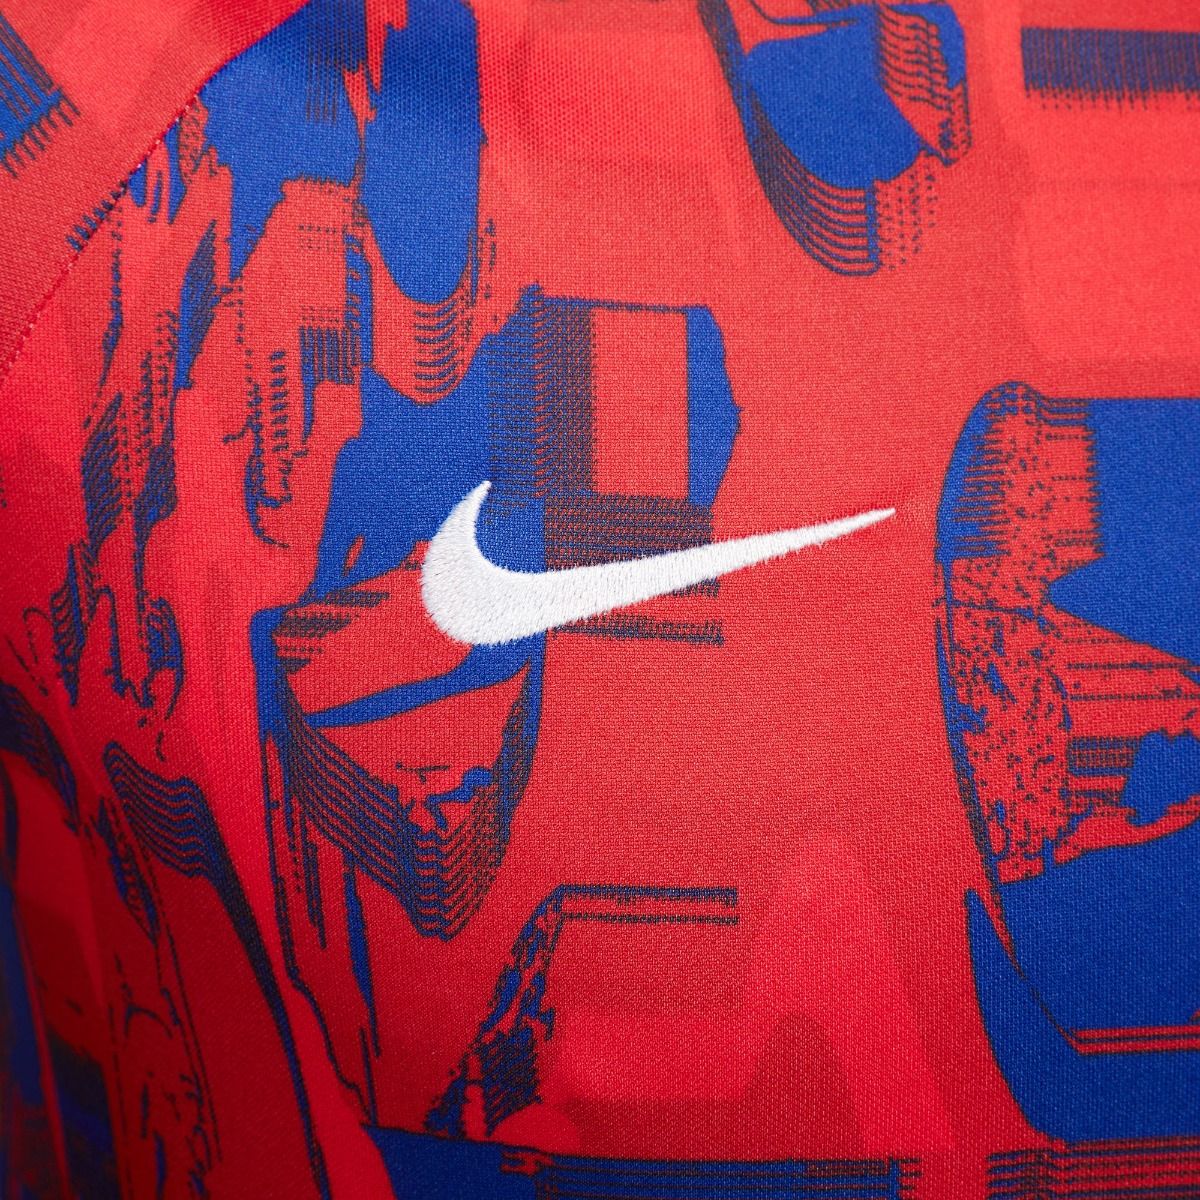 NIKE PREMATCH TRAINING T-SHIRT image number null